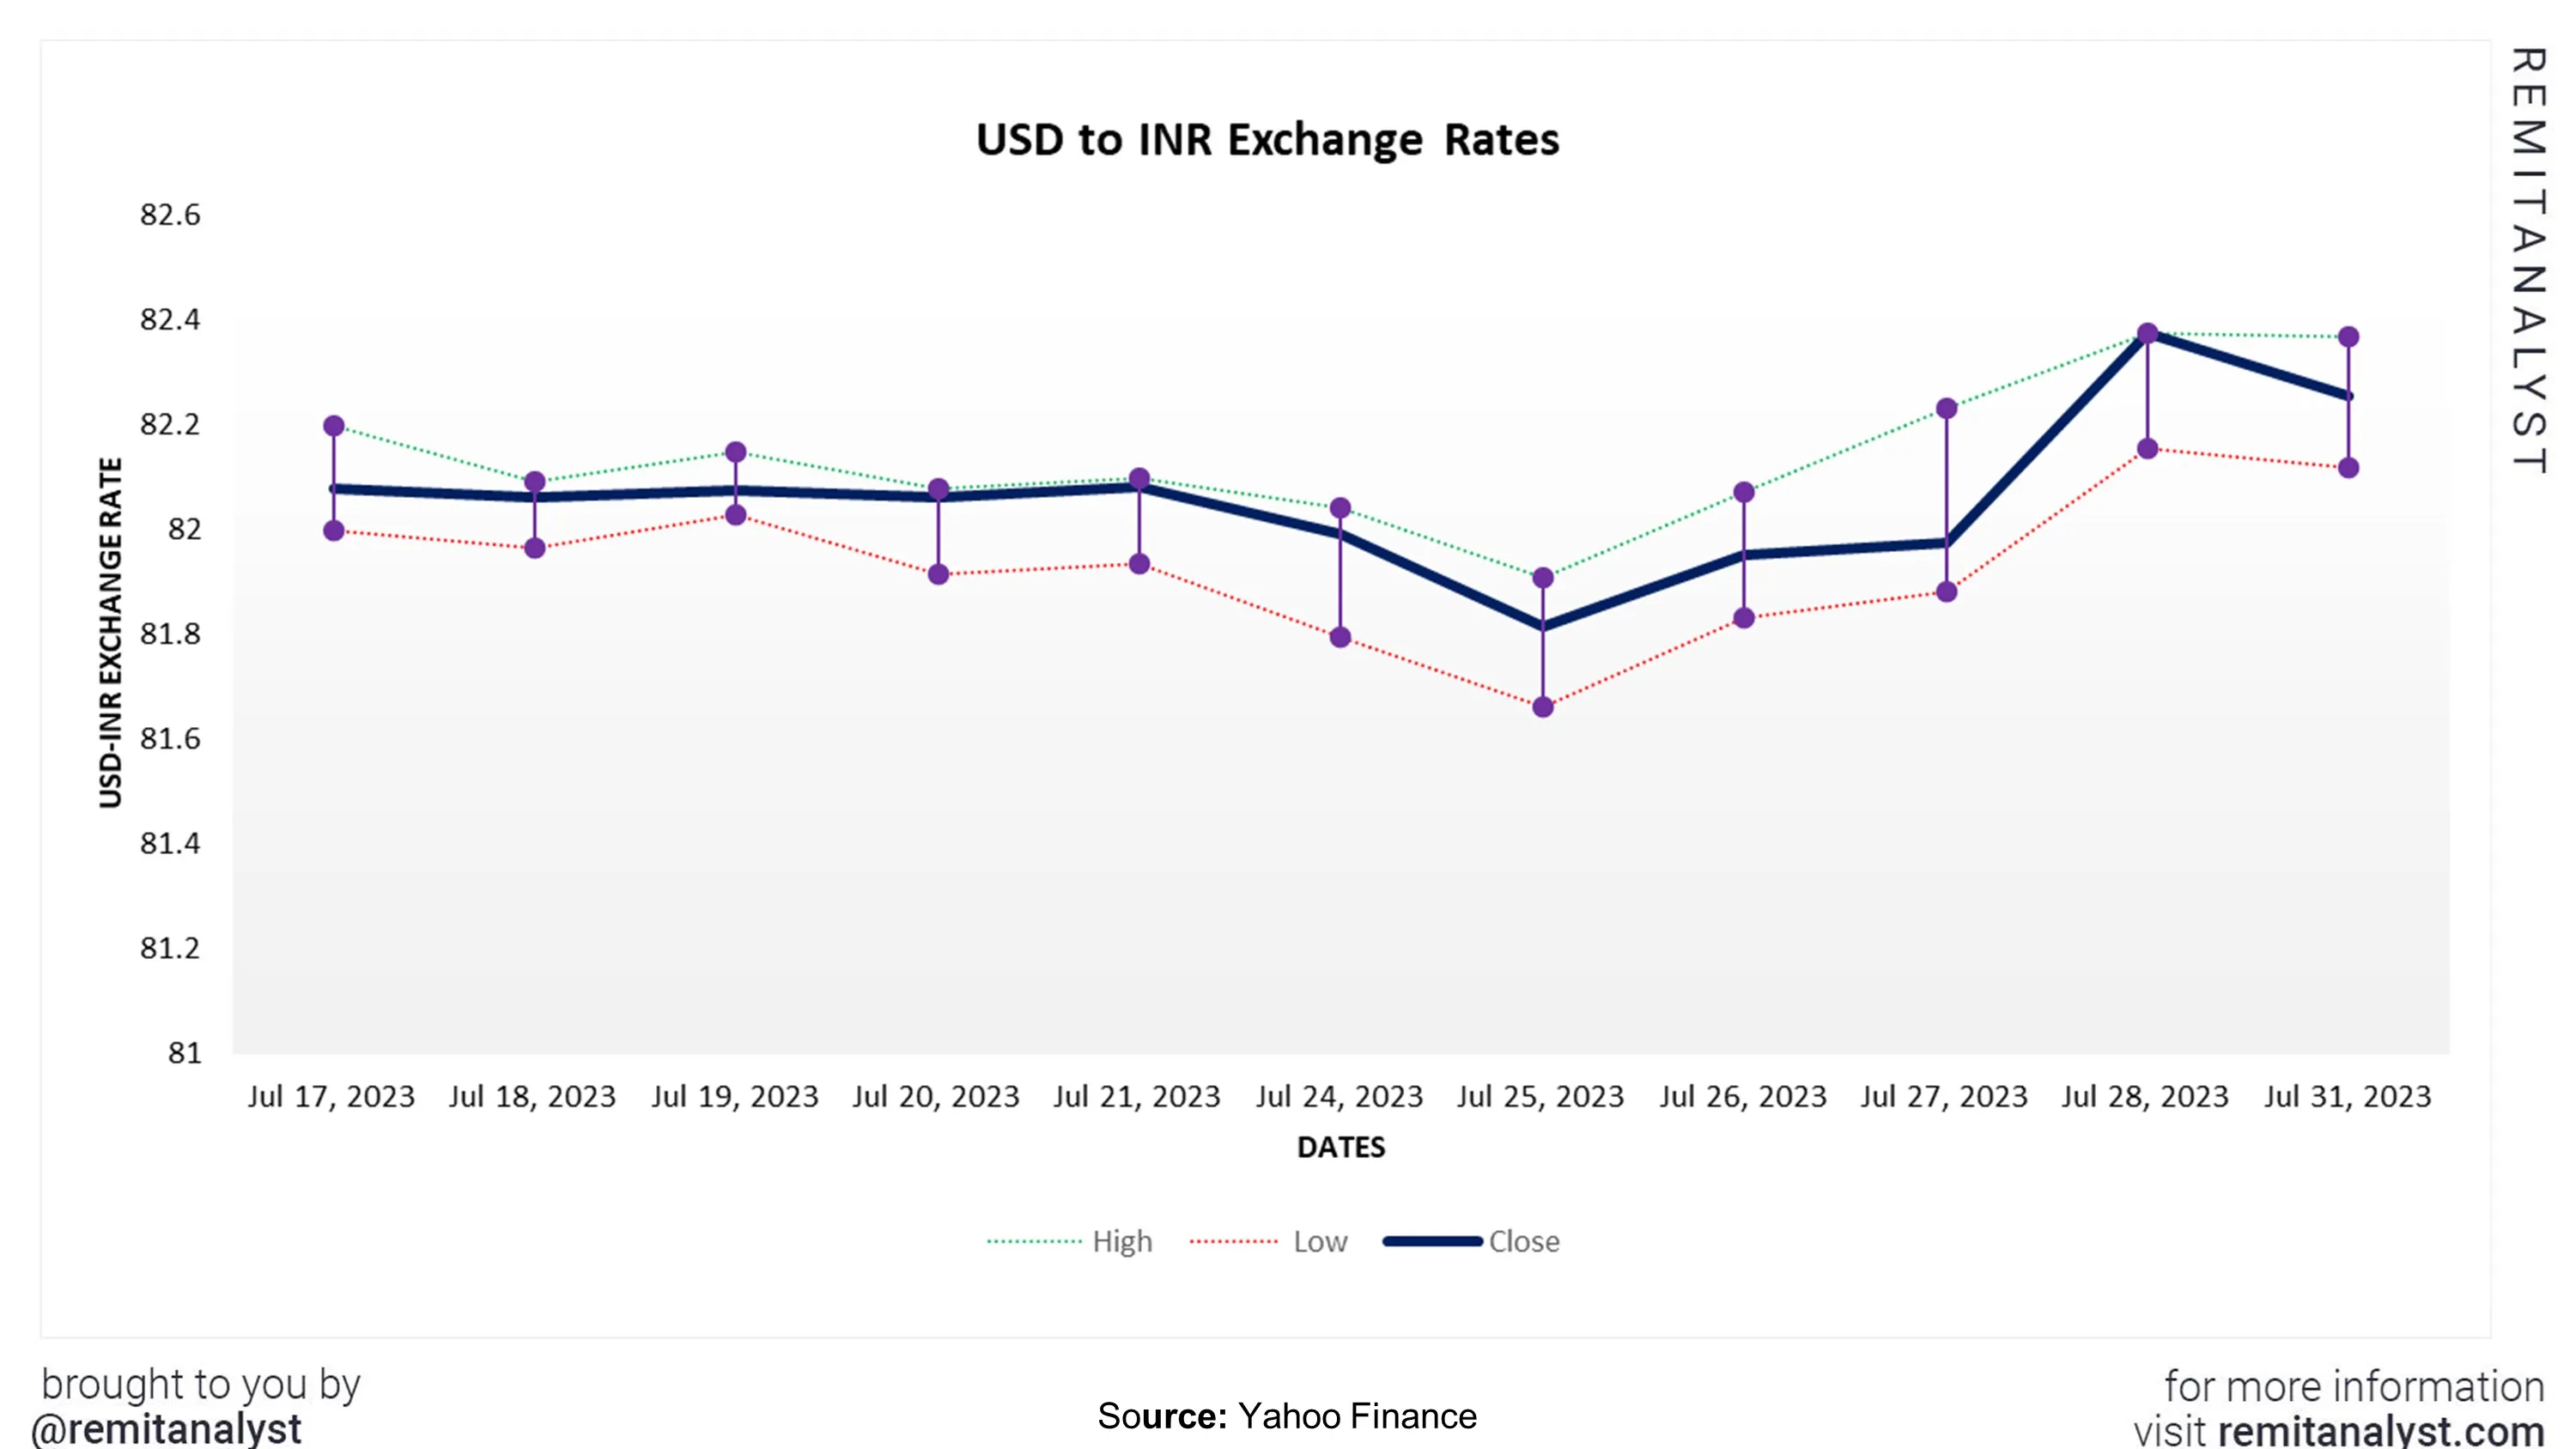 usd-to-inr-exchange-rate-from-17-jul-2023-to-31-jul-2023